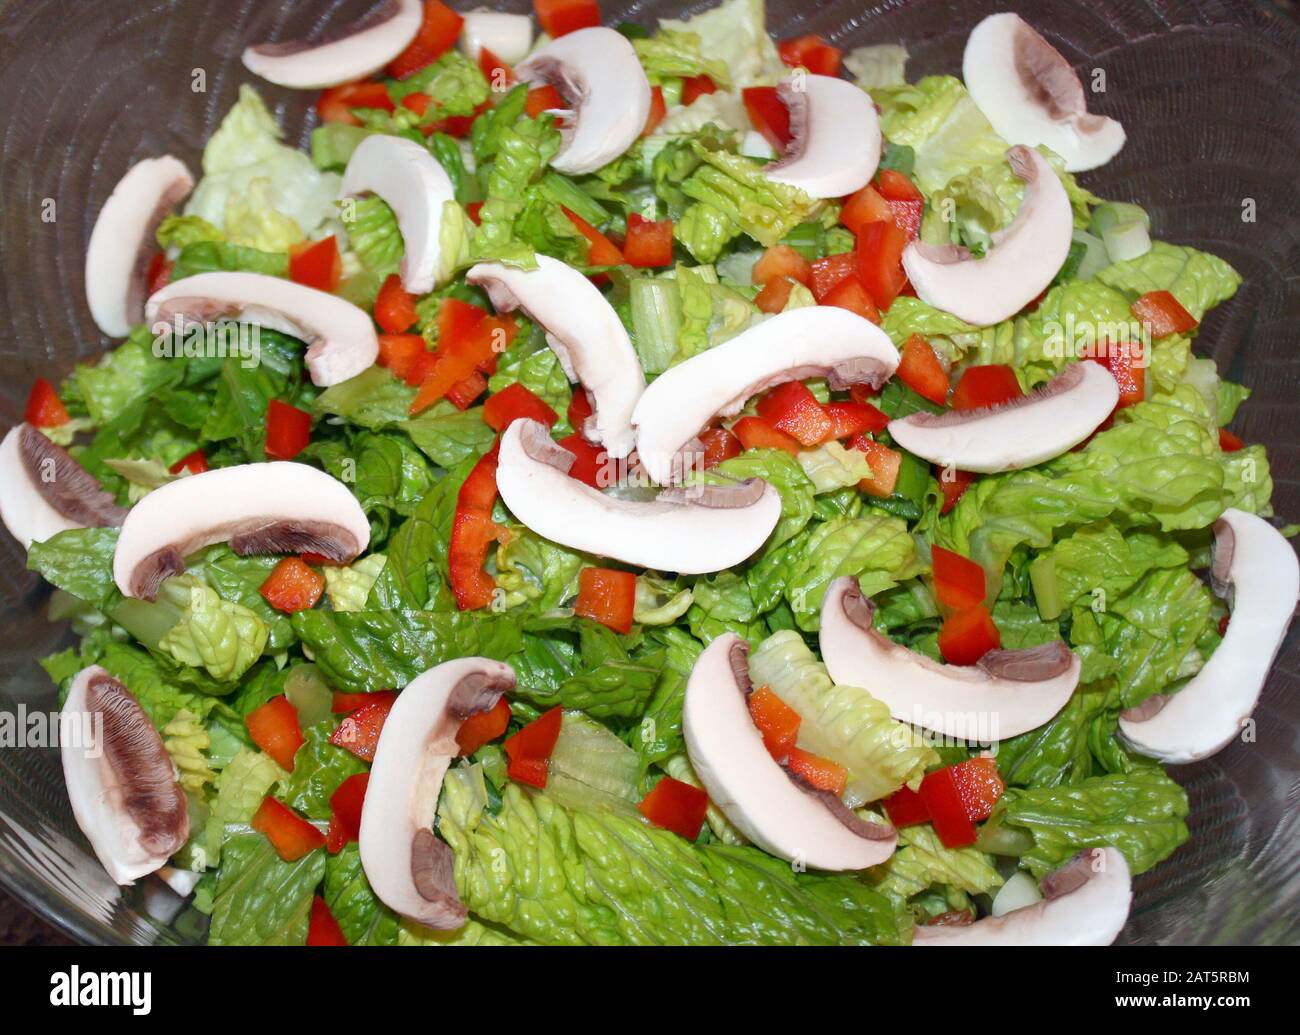 Fresh garden salad with romaine lettuce, sliced white mushrooms and diced red peppers Stock Photo